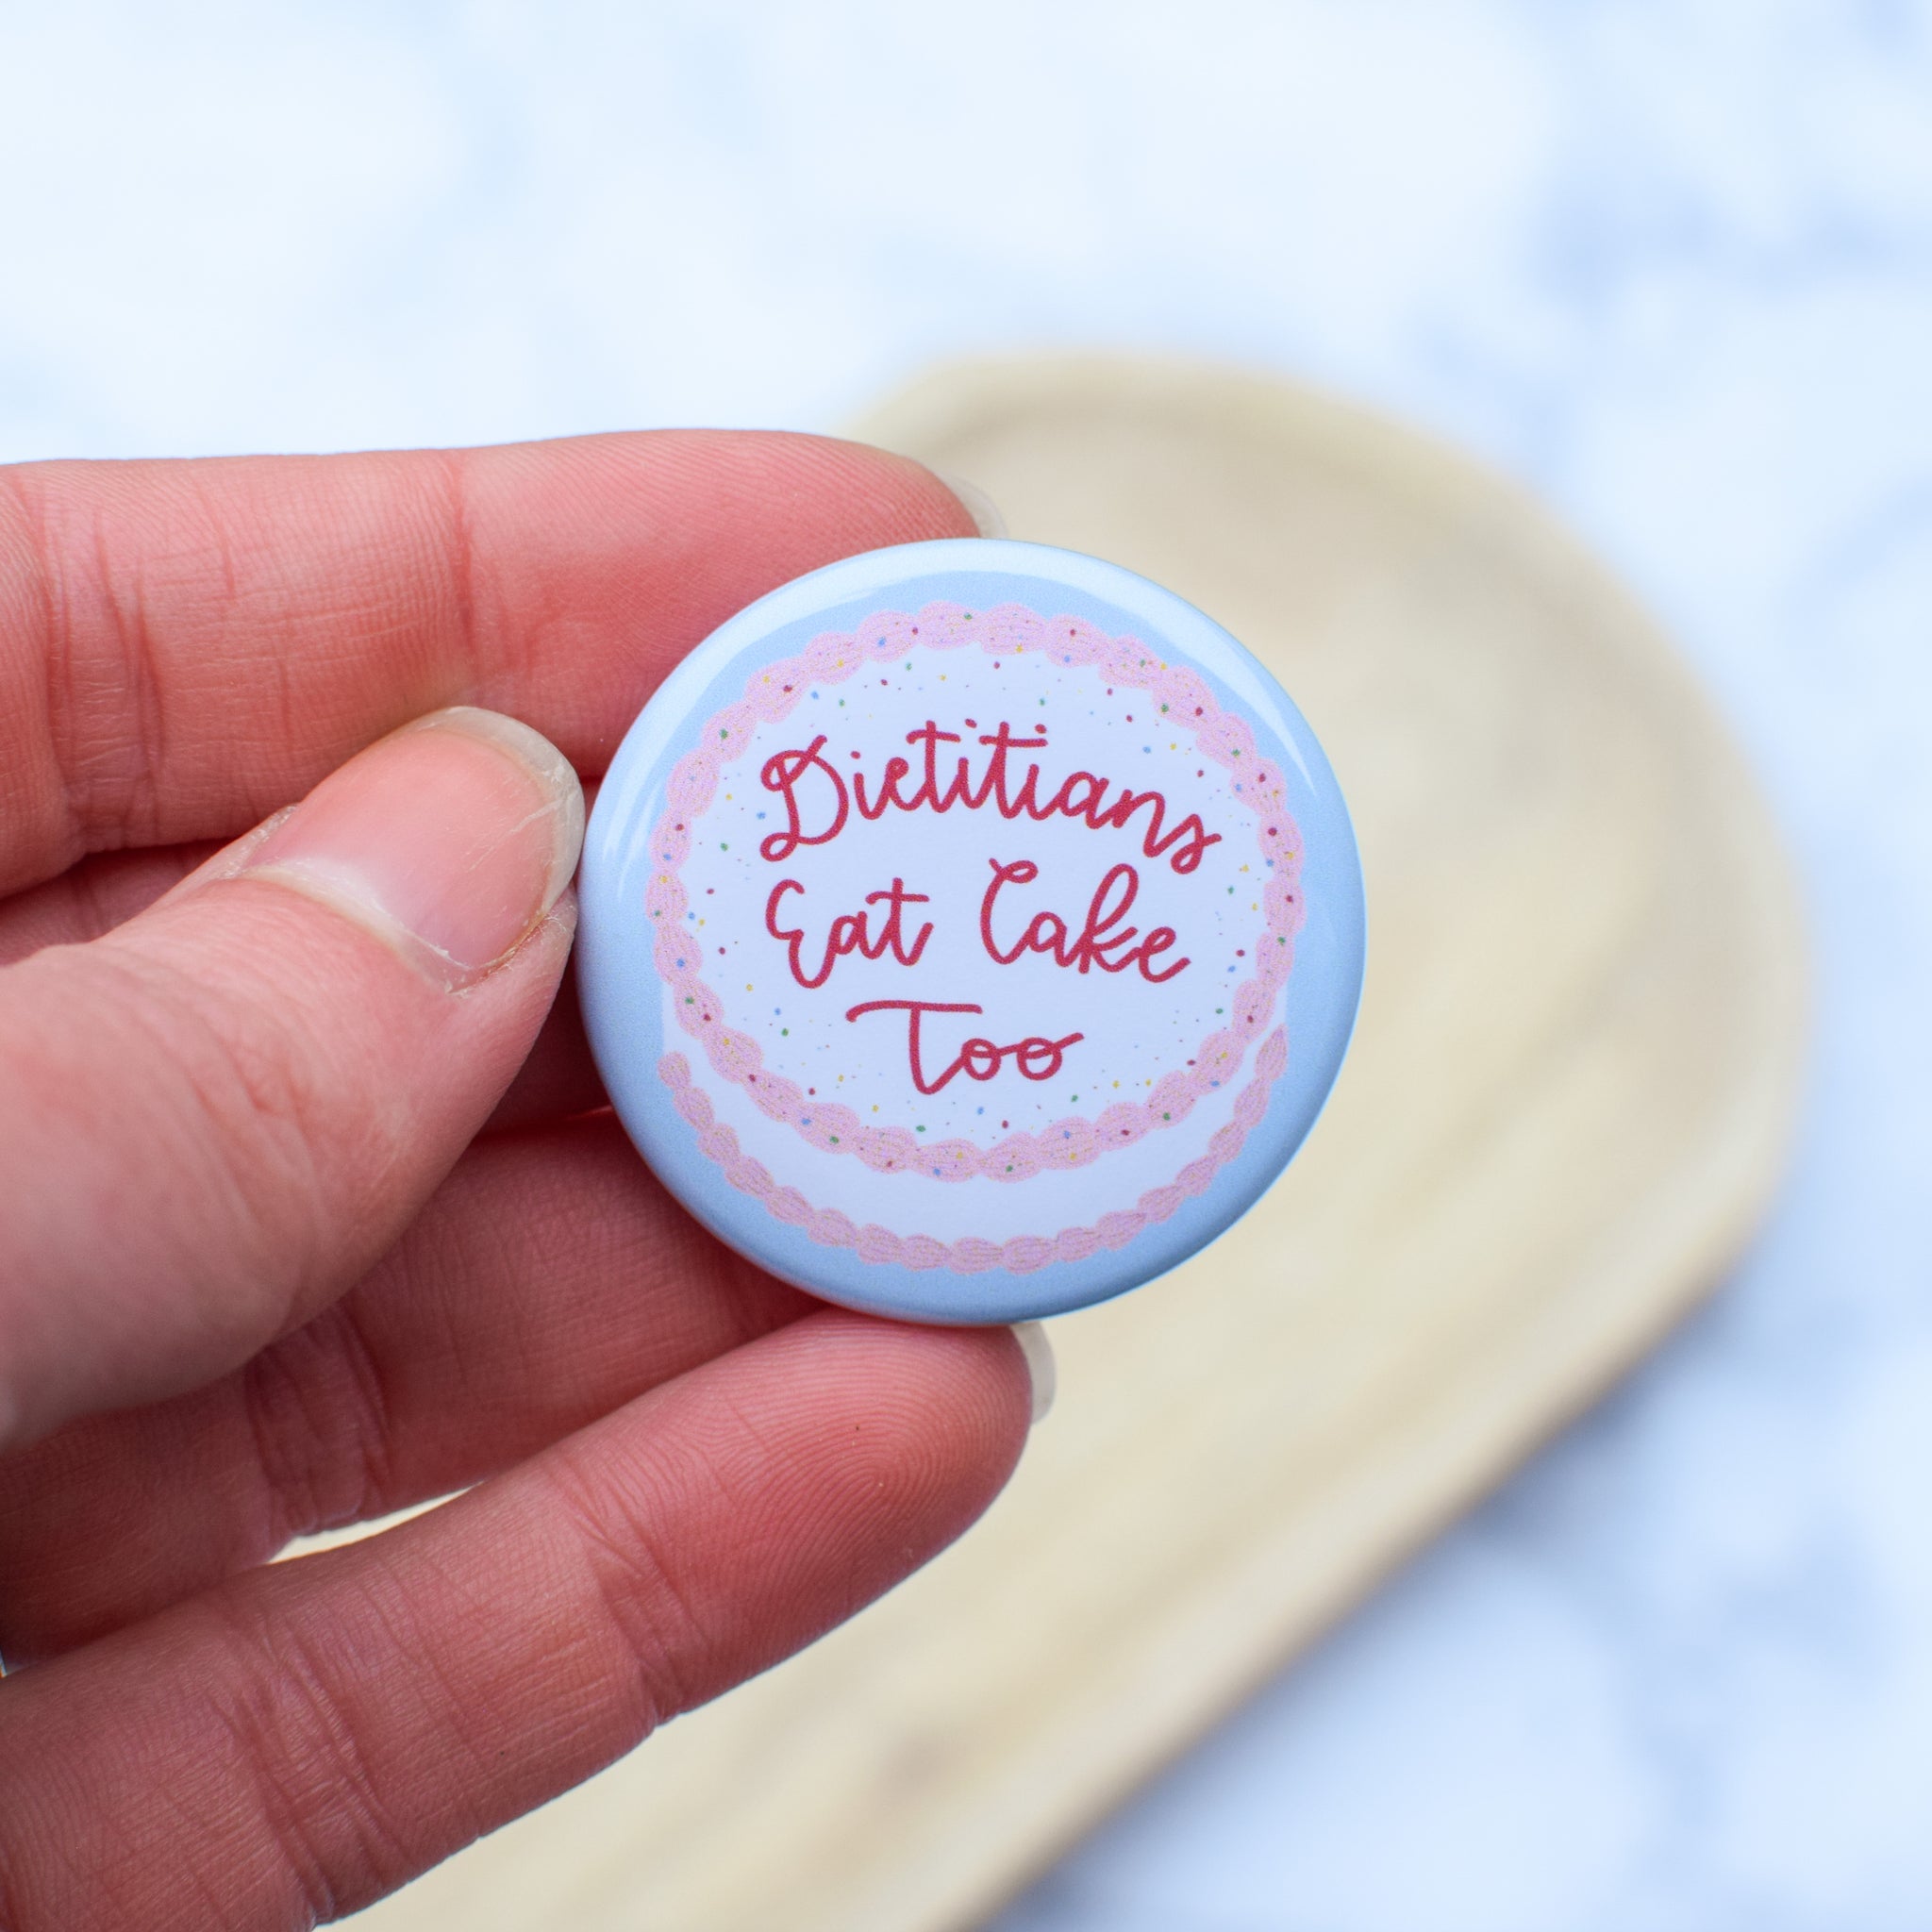 Dietitians Eat Cake Too Badge Reel + Topper Topper Only